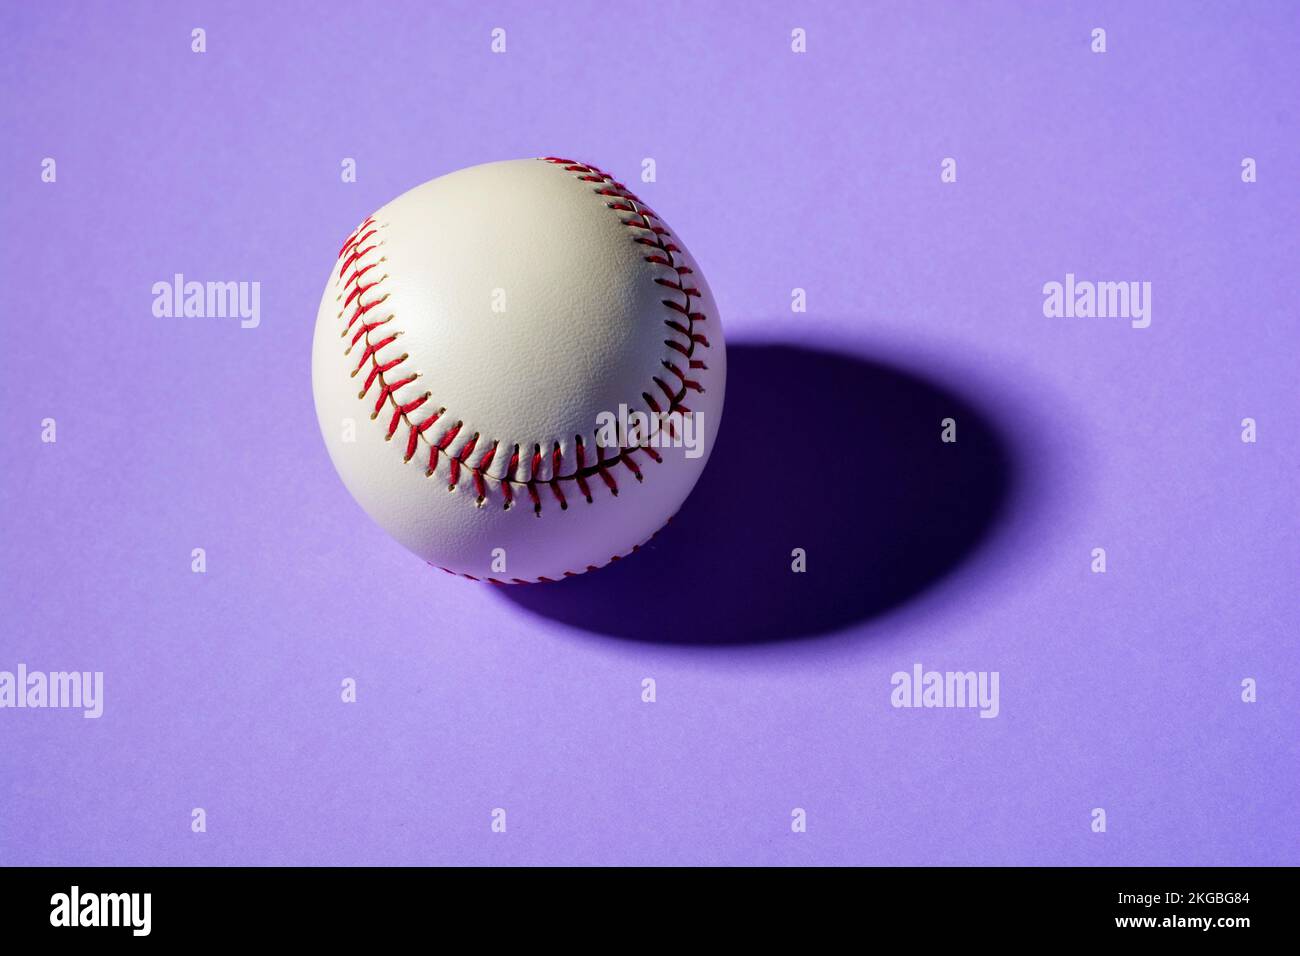 baseball ball on violet background close up with shadow. Stock Photo